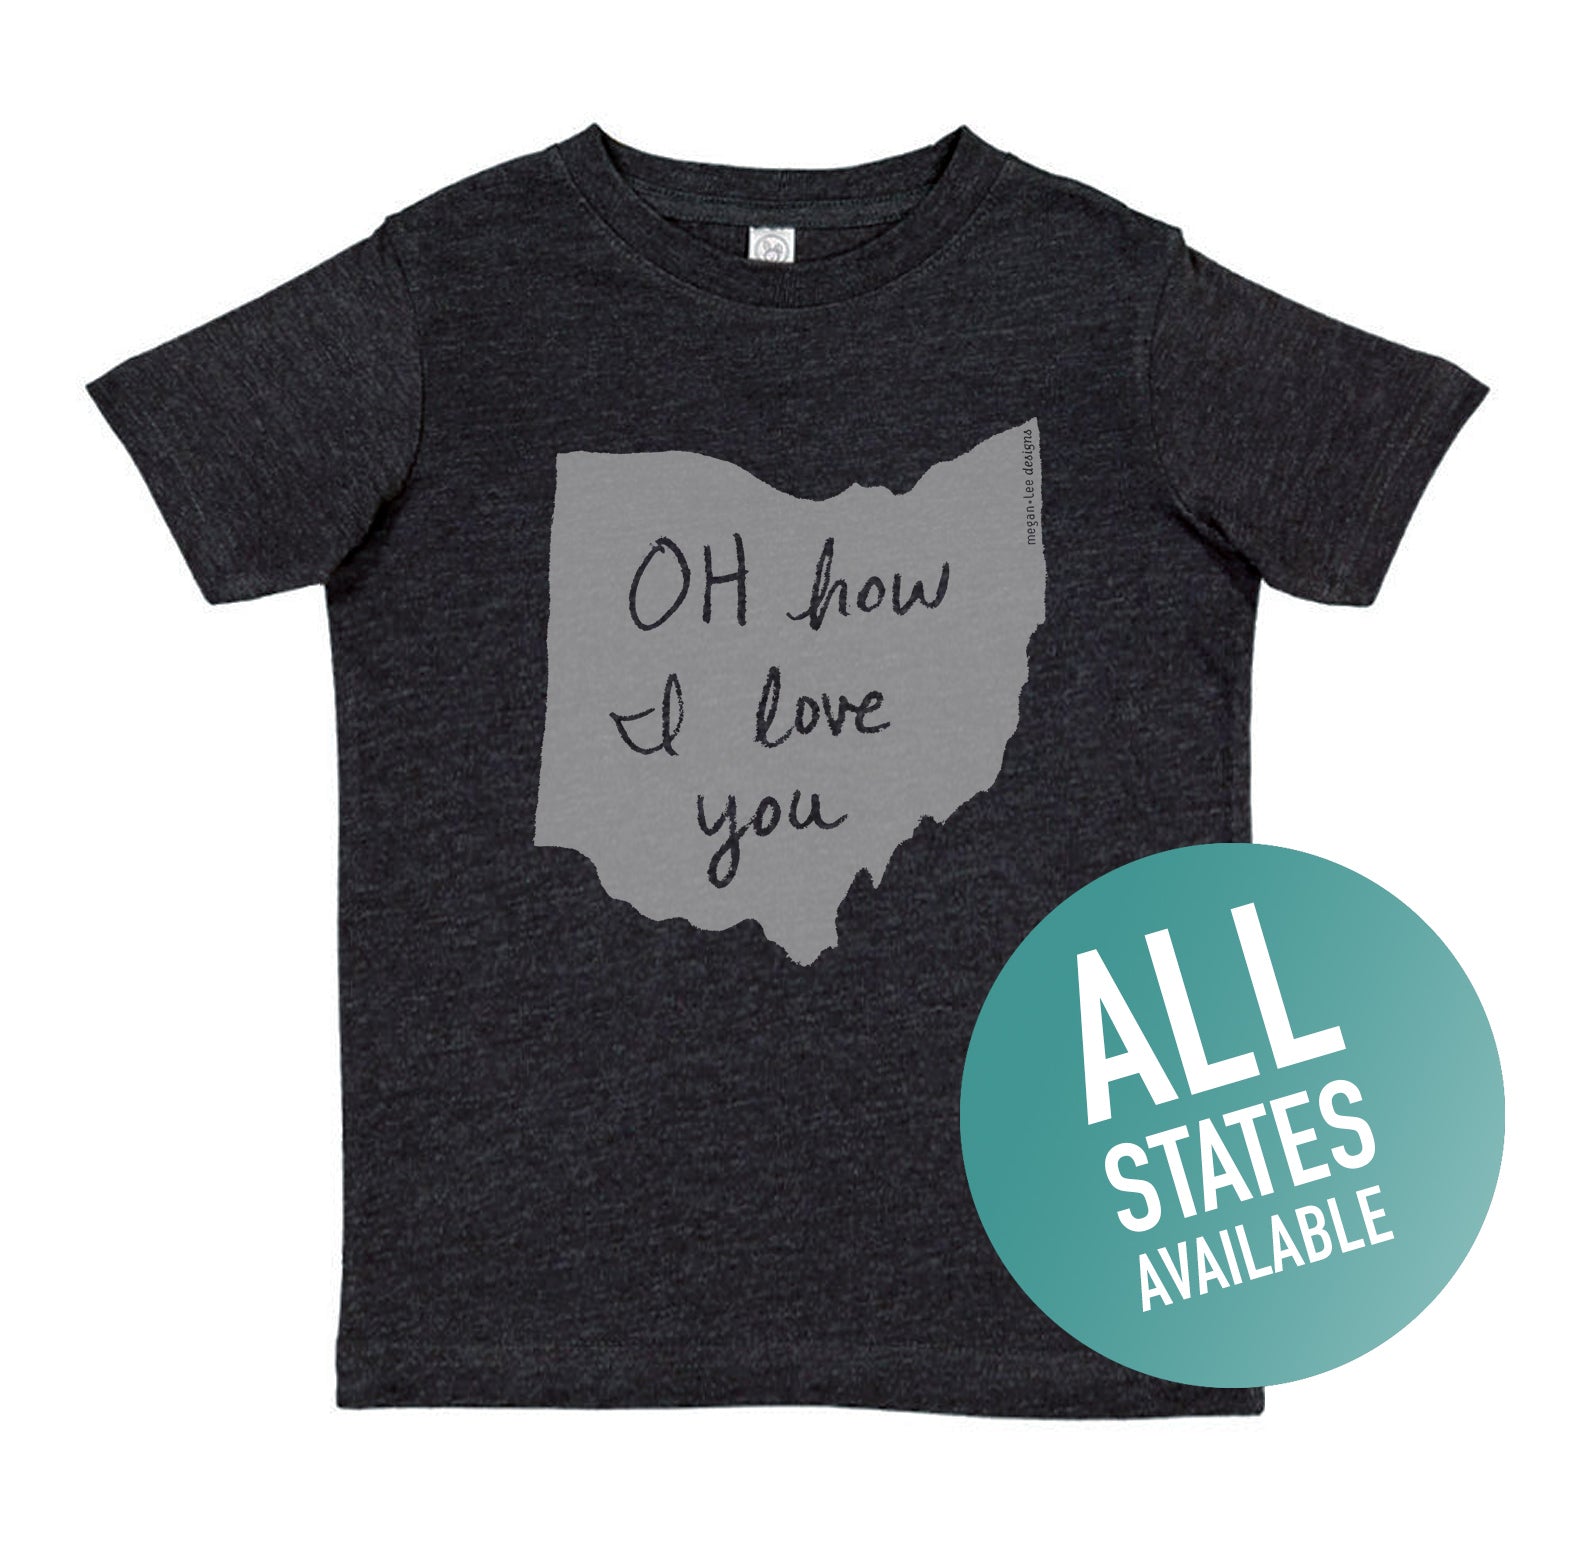 State of Mind Kids Tee - All 50 states available